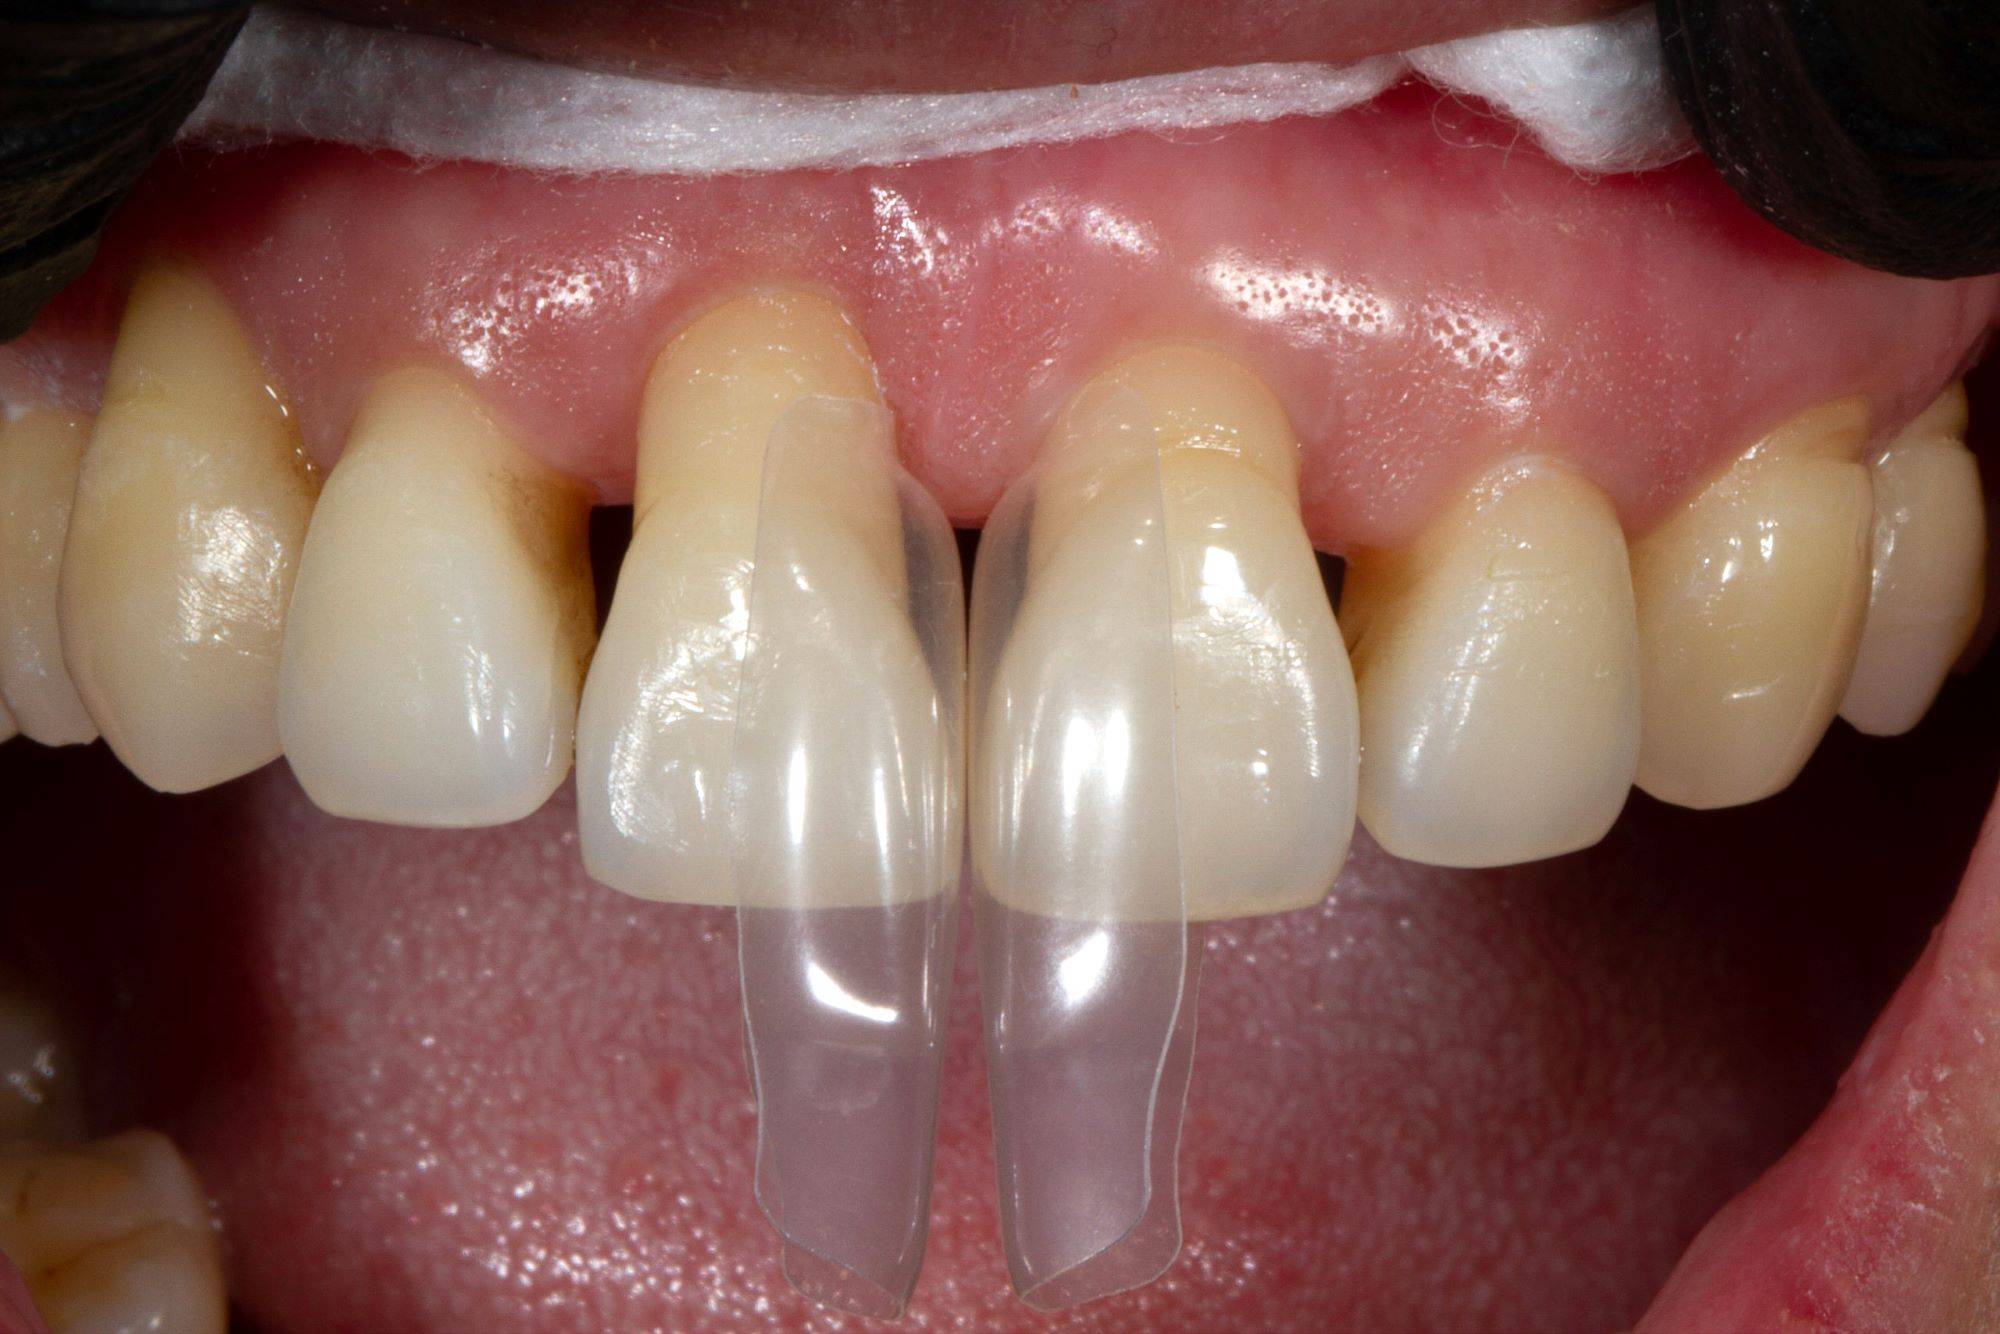 Matrix placed in central upper incisors